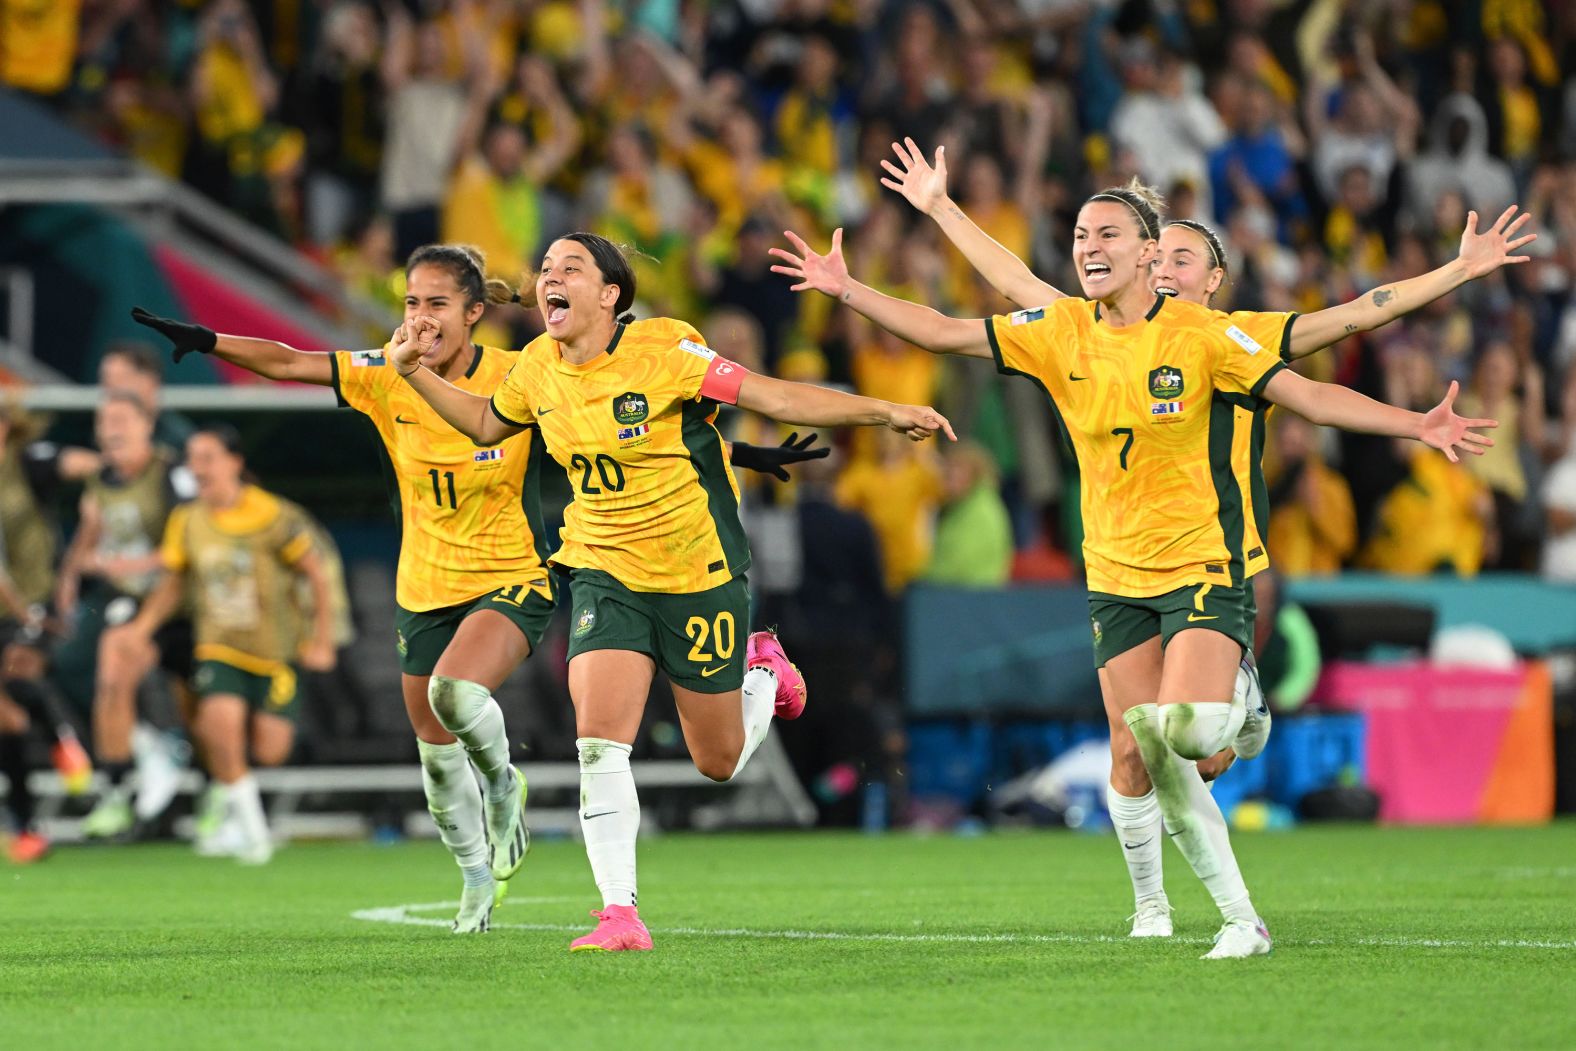 Australian players celebrate after winning a <a href="index.php?page=&url=https%3A%2F%2Fwww.cnn.com%2F2023%2F08%2F11%2Ffootball%2Faustralia-france-england-colombia-womens-world-cup-quarterfinal-spt-intl%2Findex.html" target="_blank">dramatic penalty shootout</a> against France on August 12. The shootout was decided on the 20th kick.